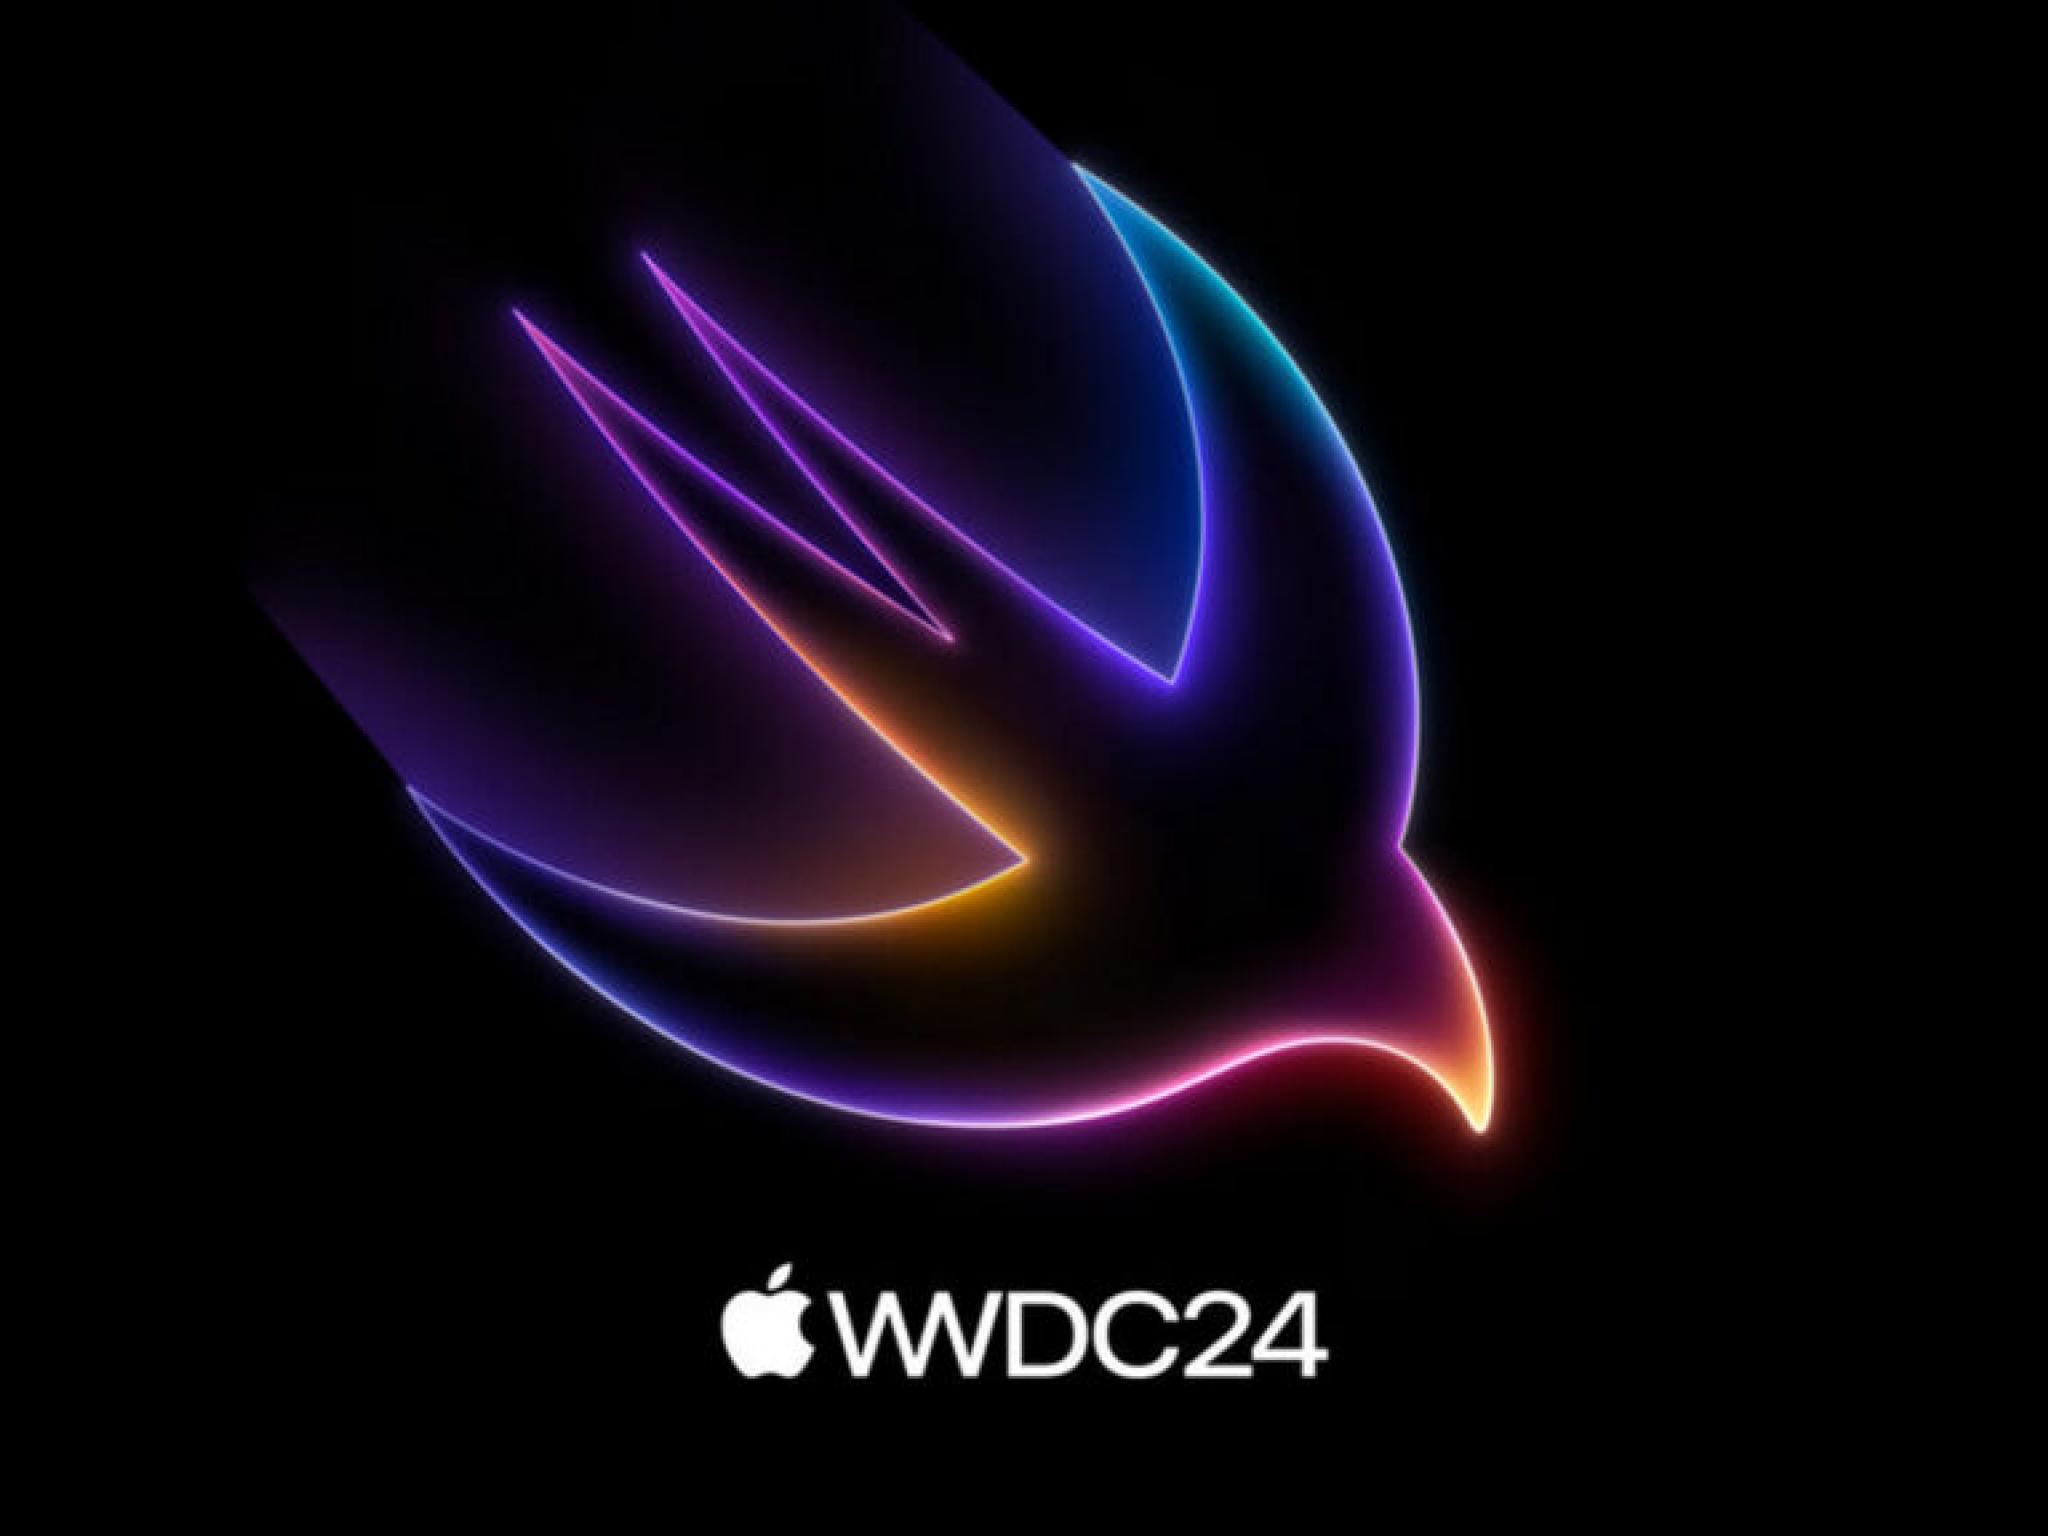  apples-wwdc-keynote-schedule-is-out-as-tim-cook-led-company-looks-to-unveil-its-ai-strategy-heres-what-you-need-to-know 